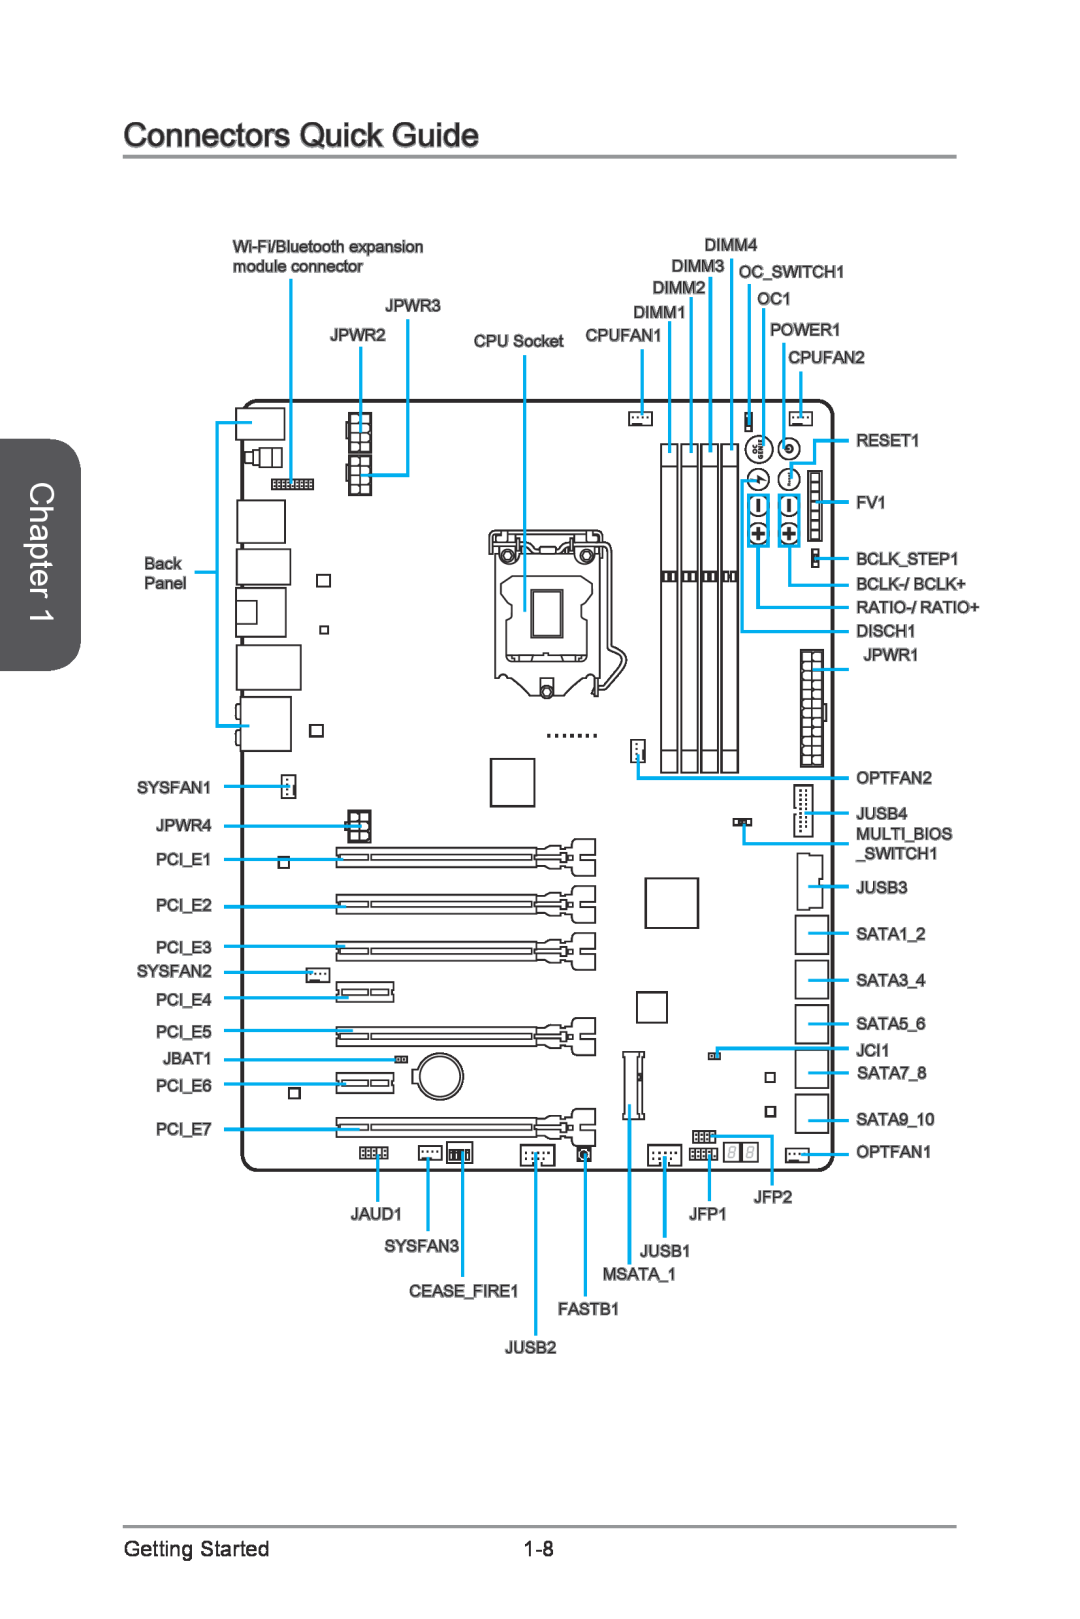 MSI Z87-XPOWER manual Connectors Quick Guide, Chapter 